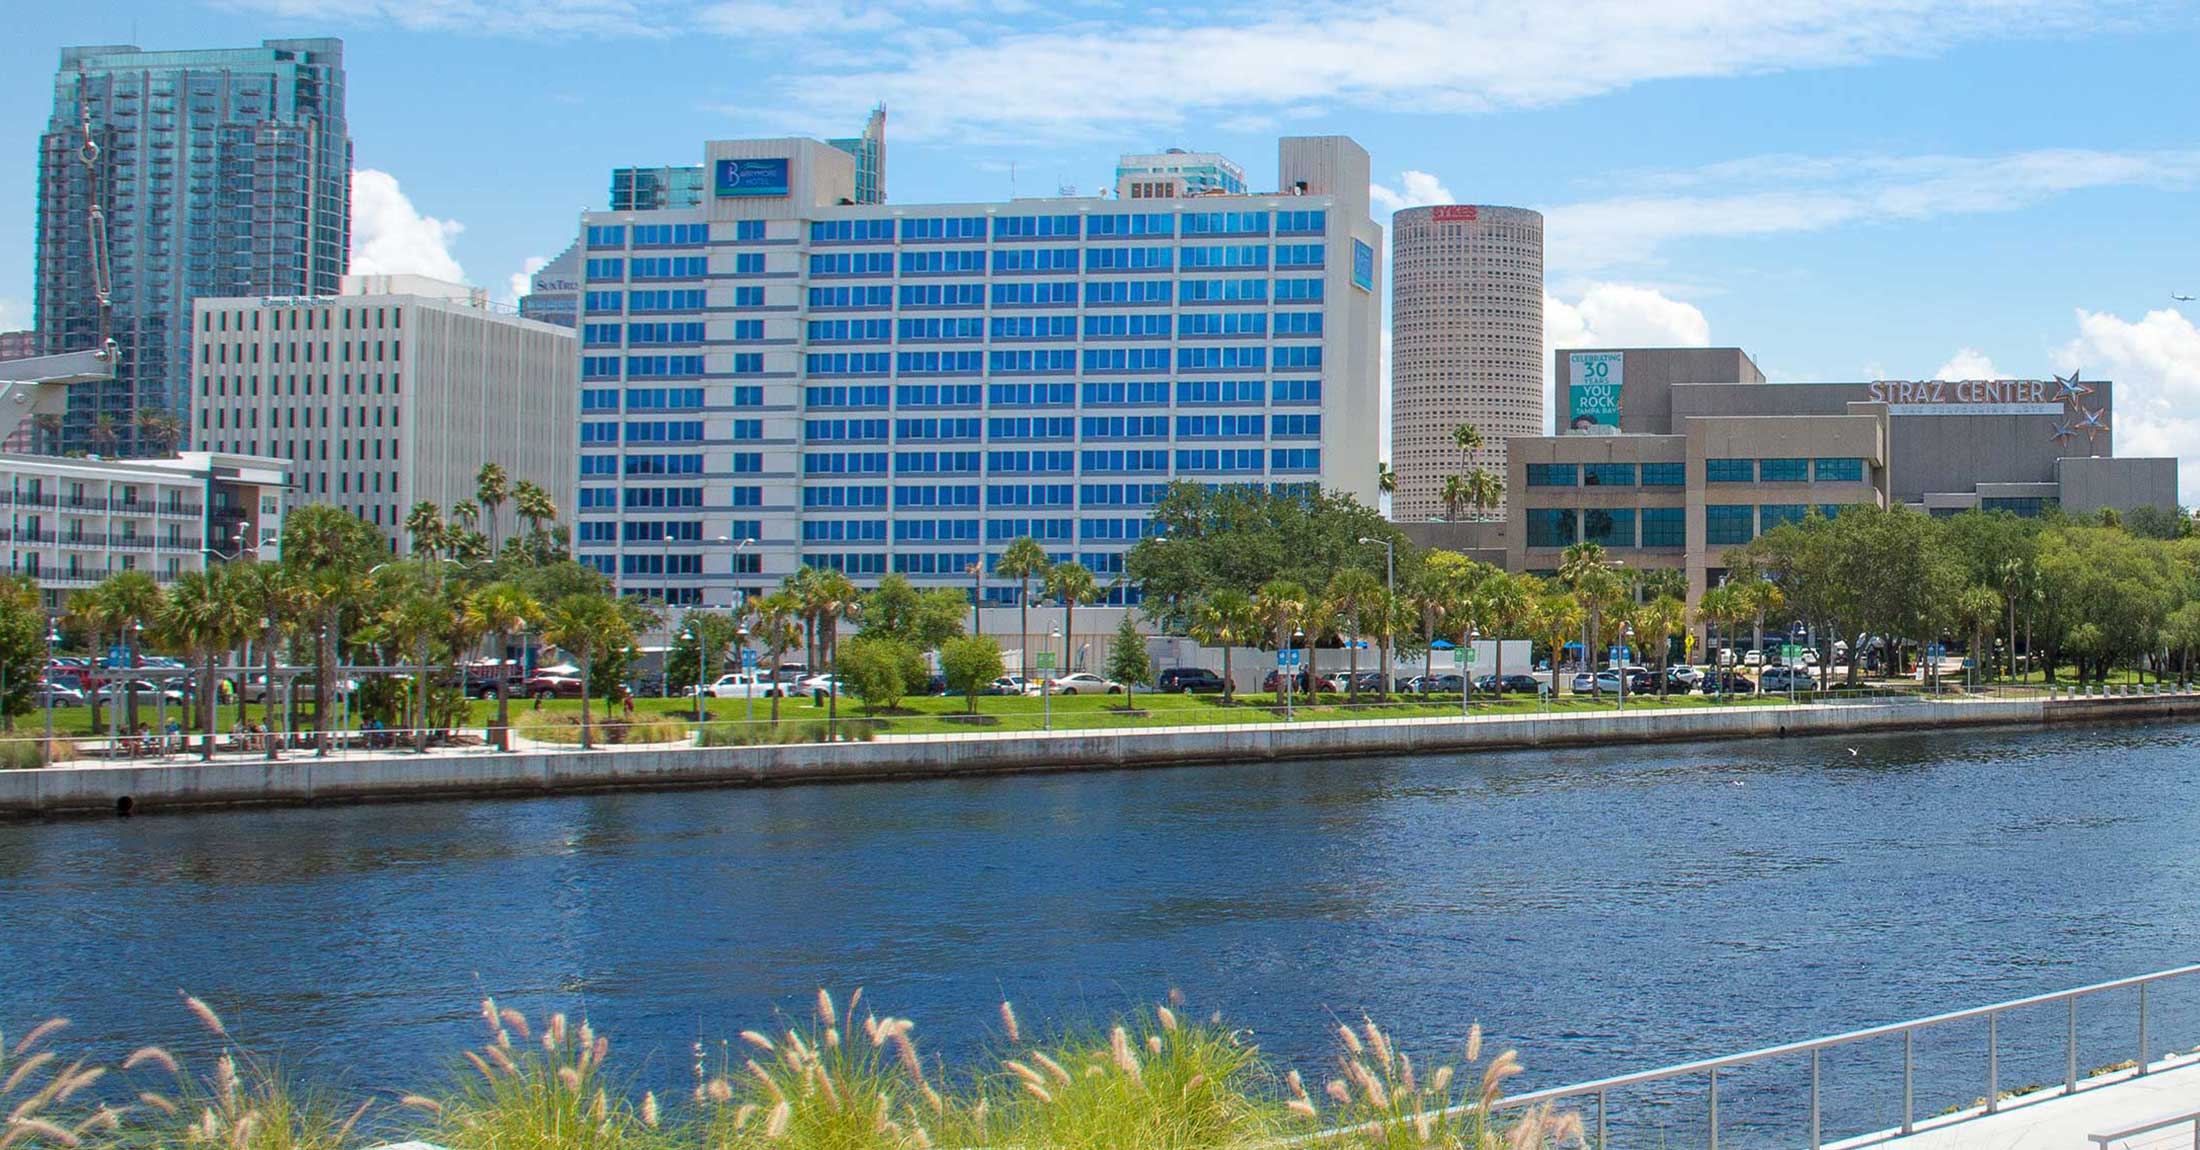 view of hotel from across river at tampa river center